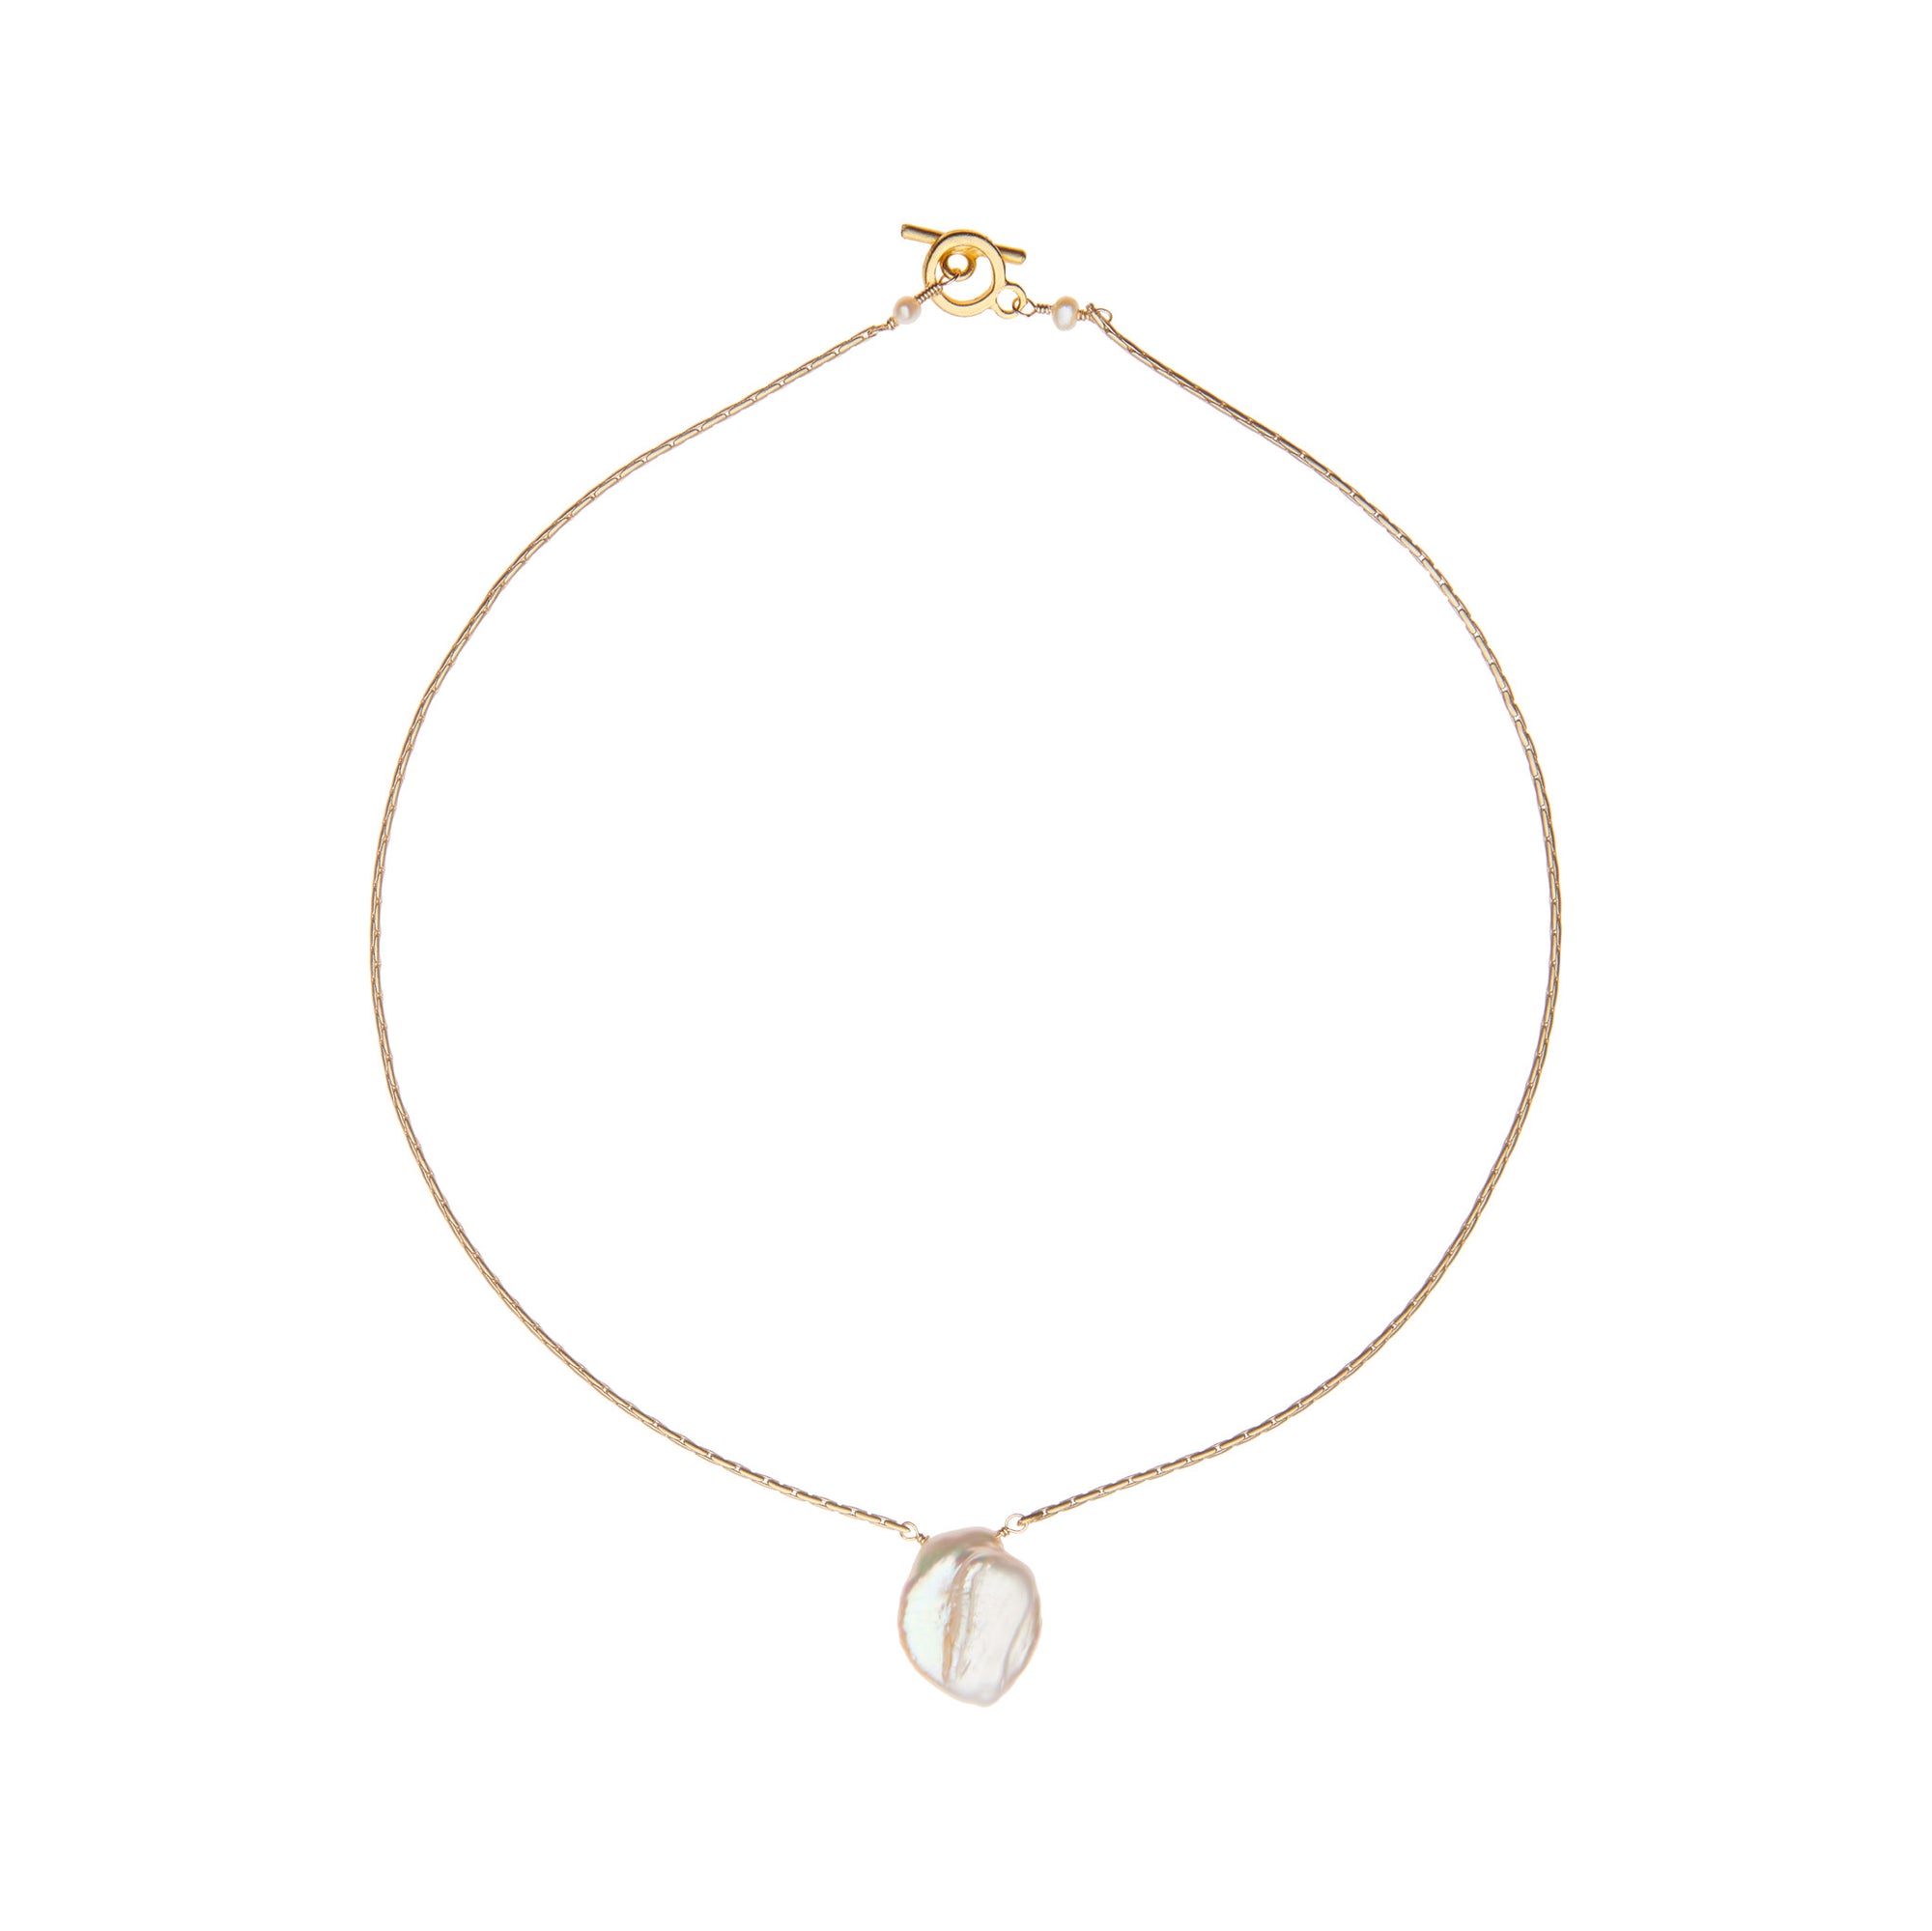 Single baroque pearl necklace on matte gold chain by vivien walsh